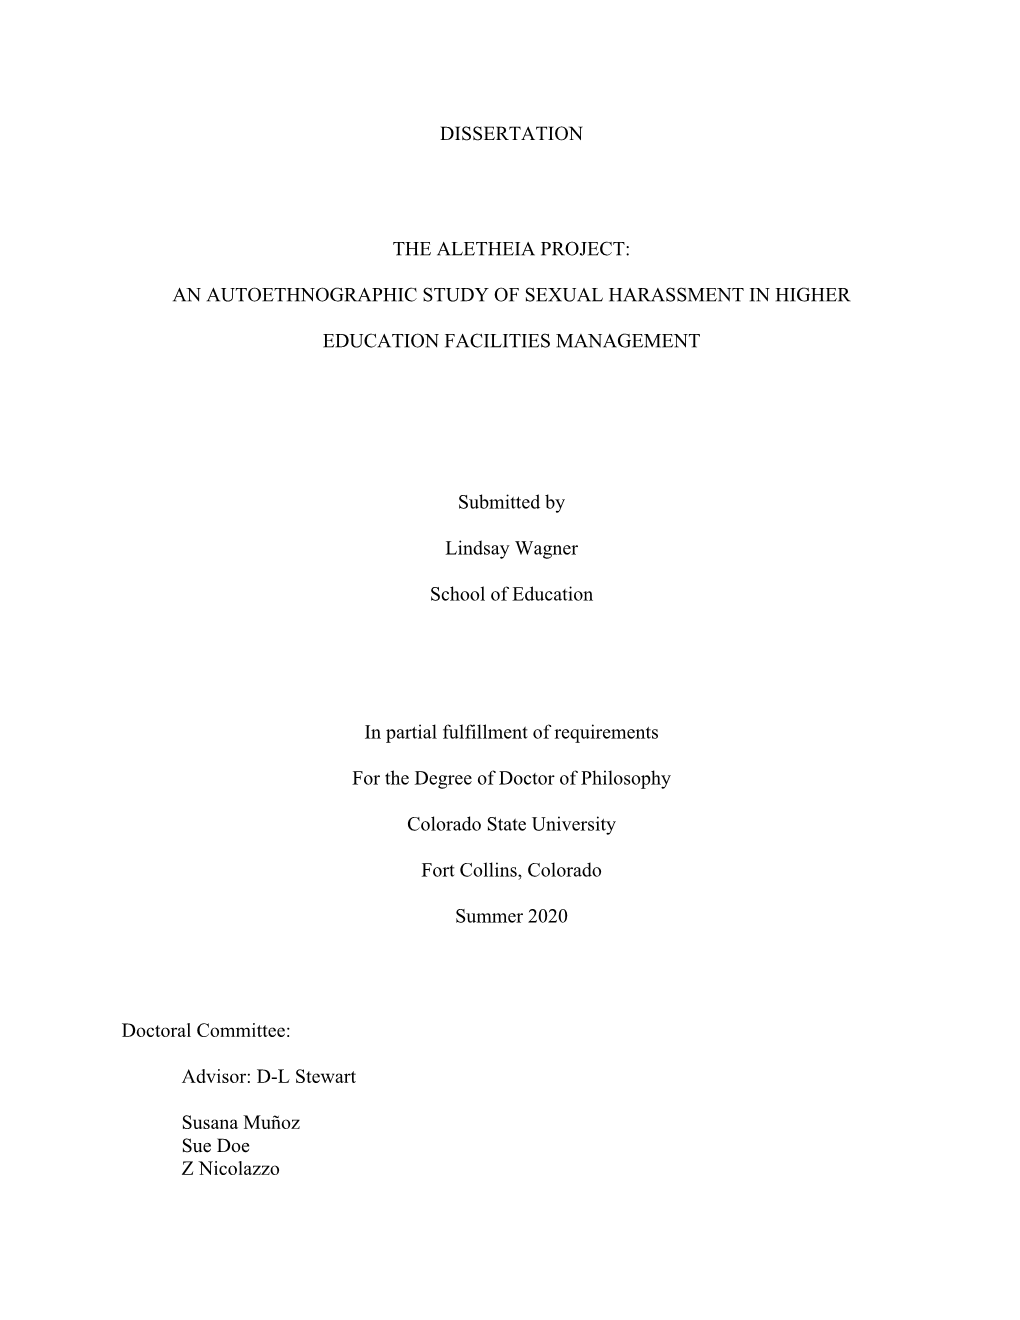 Dissertation the Aletheia Project: An